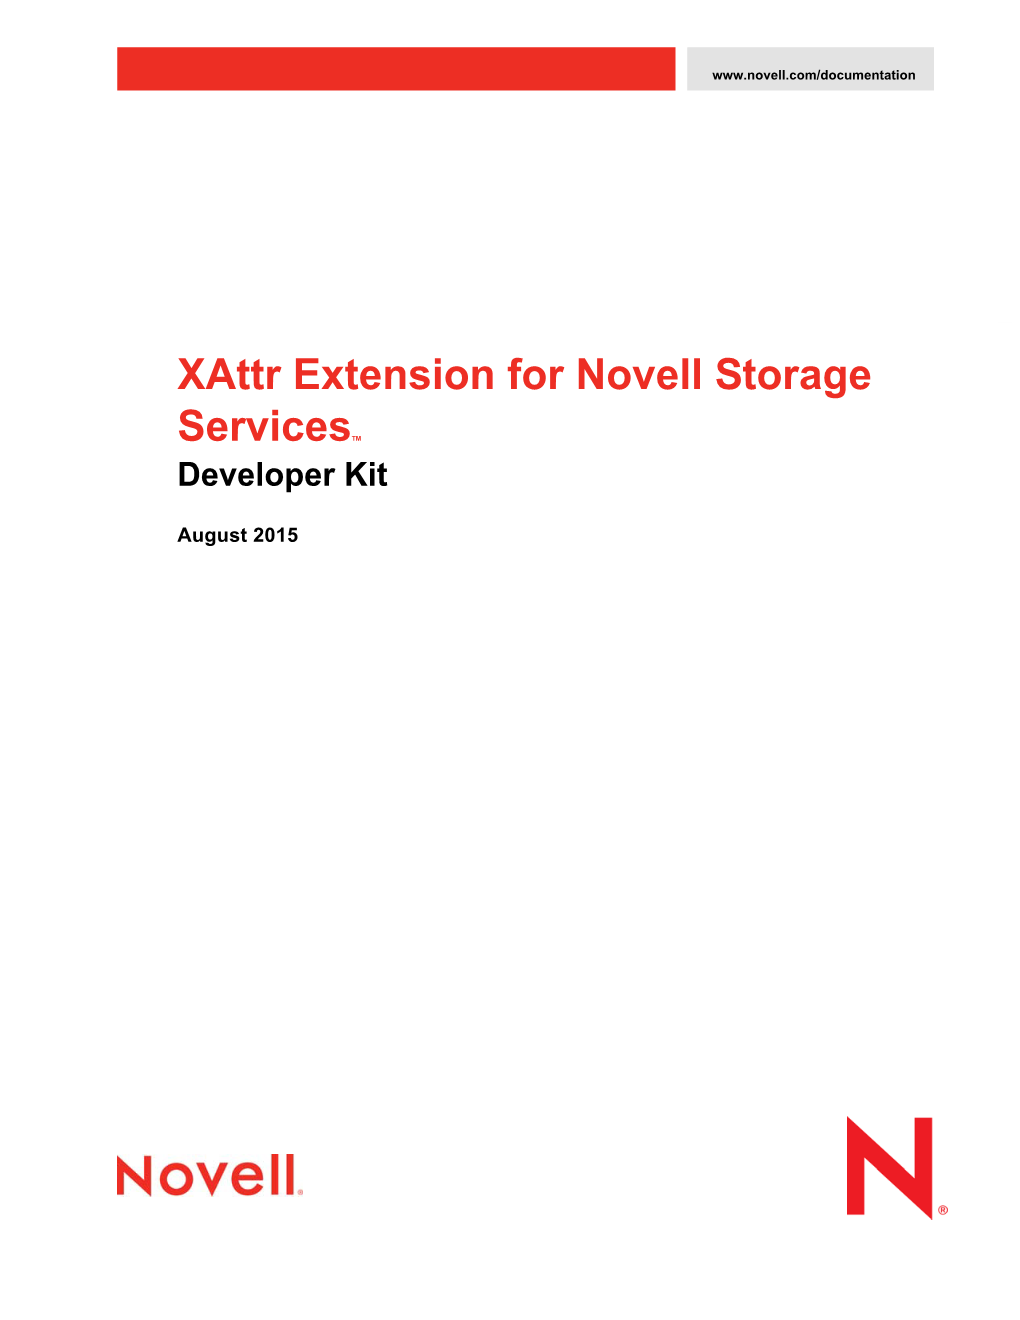 NDK: Xattr Extension for NSS About This Guide